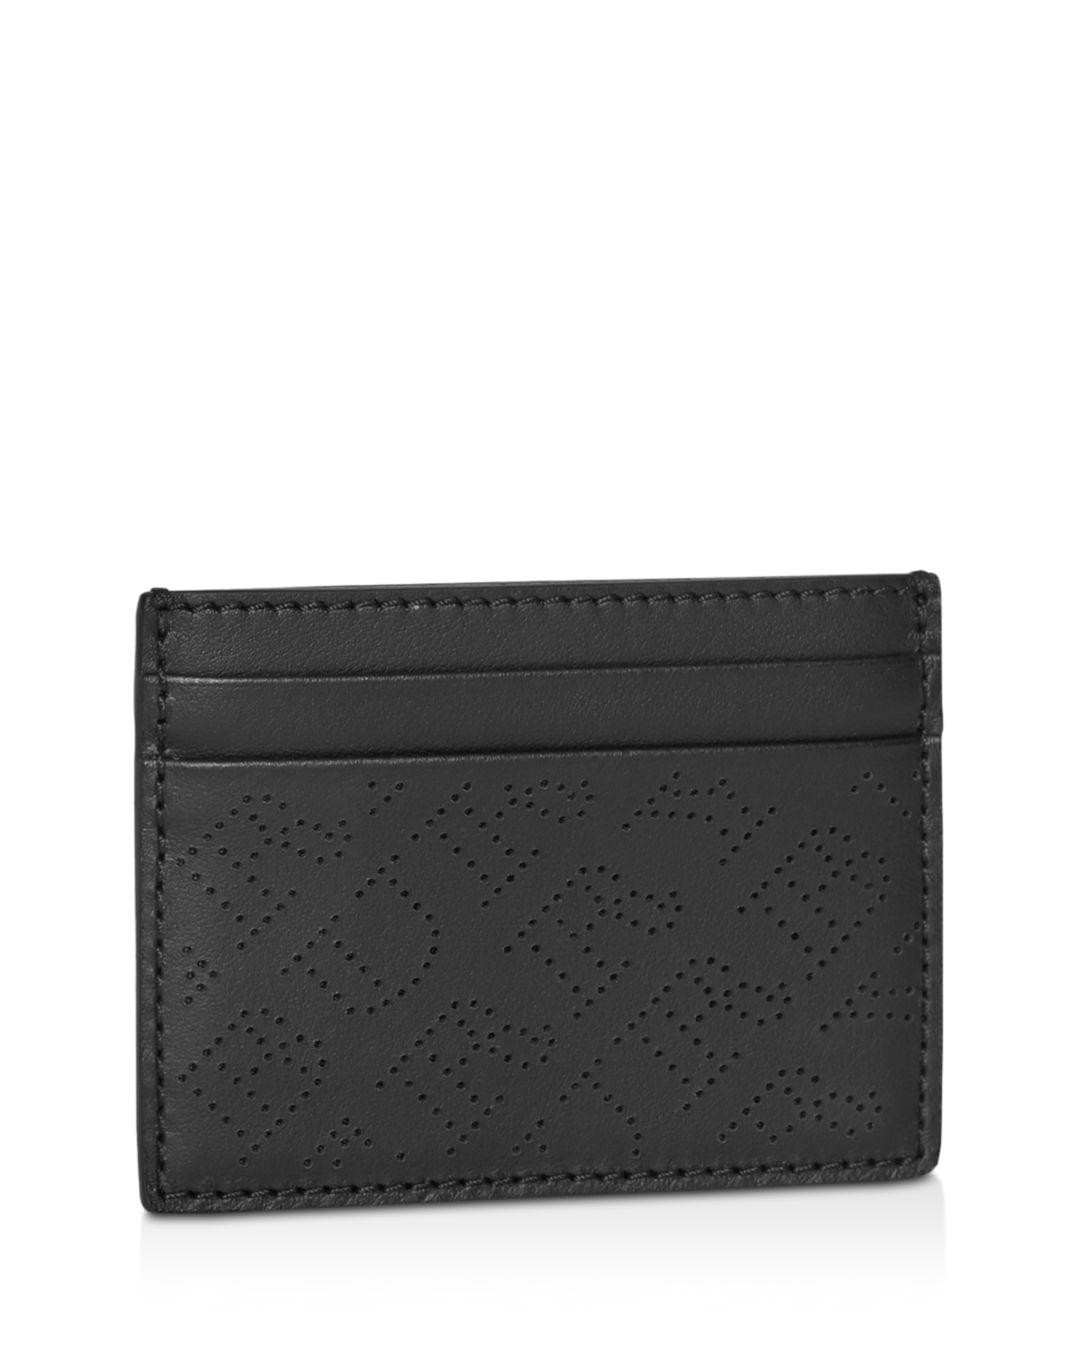 burberry black perforated logo leather card case jpeg